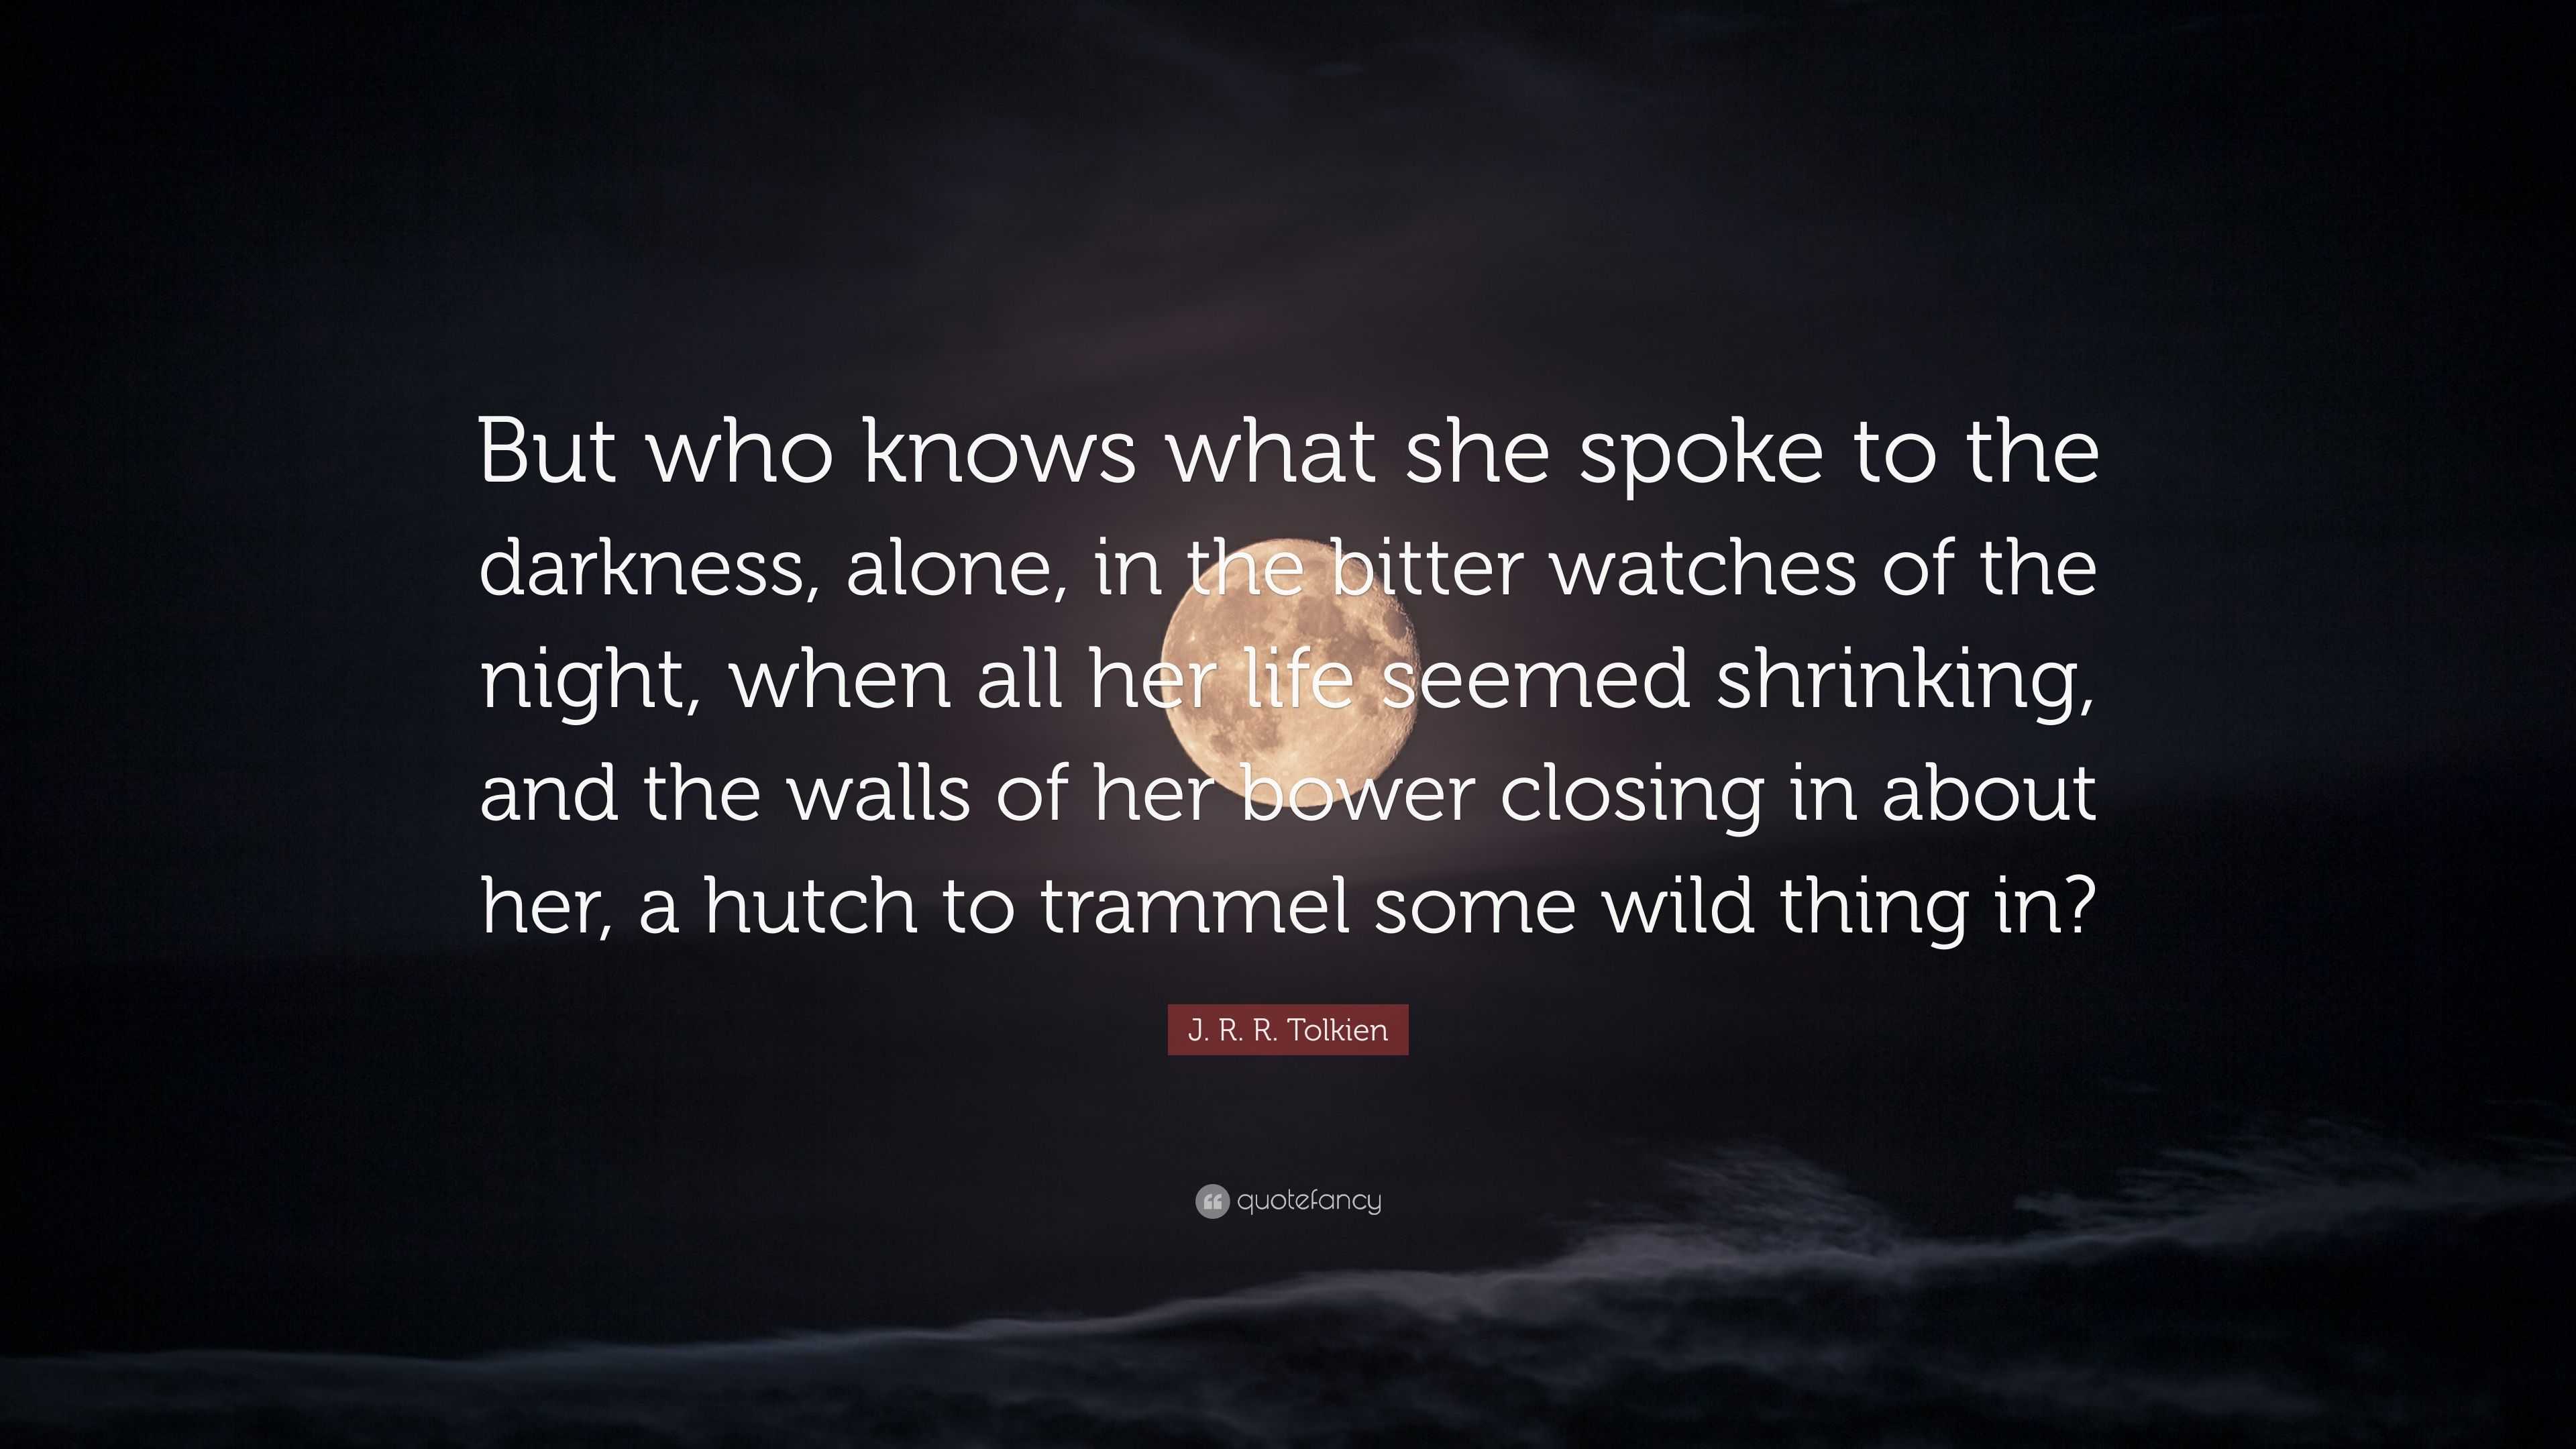 J. R. R. Tolkien Quote: “But who knows what she spoke to the darkness ...